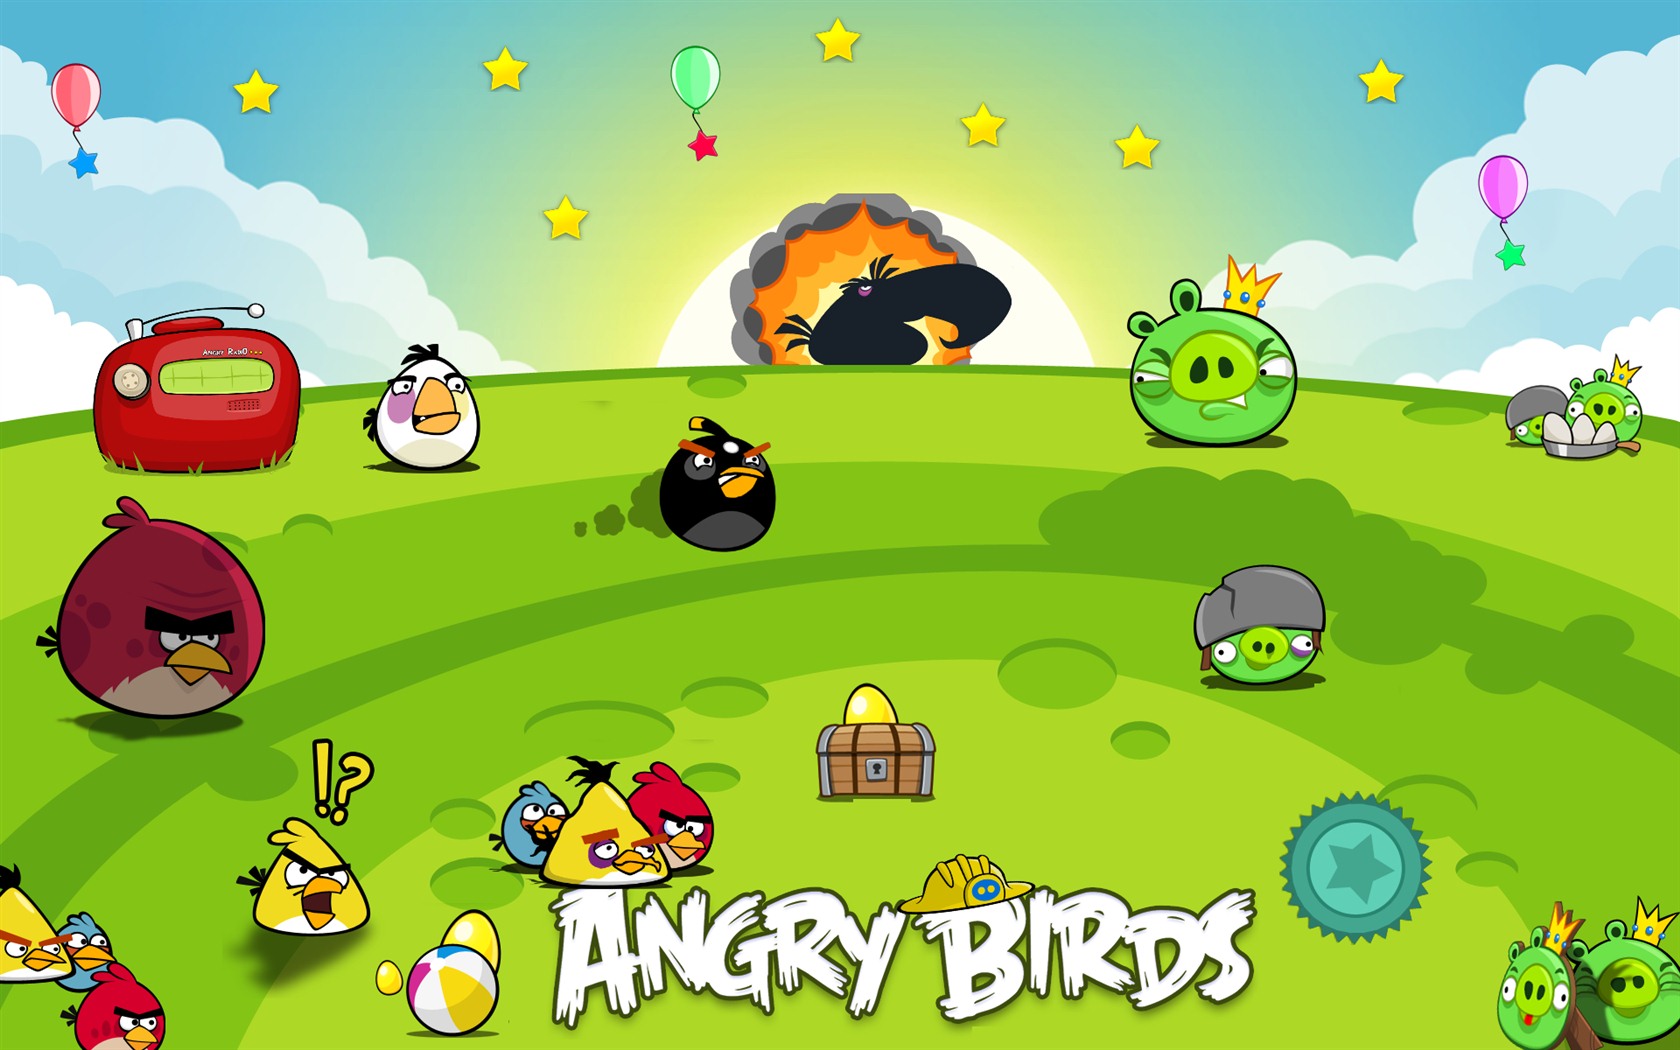 Angry Birds Game Wallpapers #12 - 1680x1050